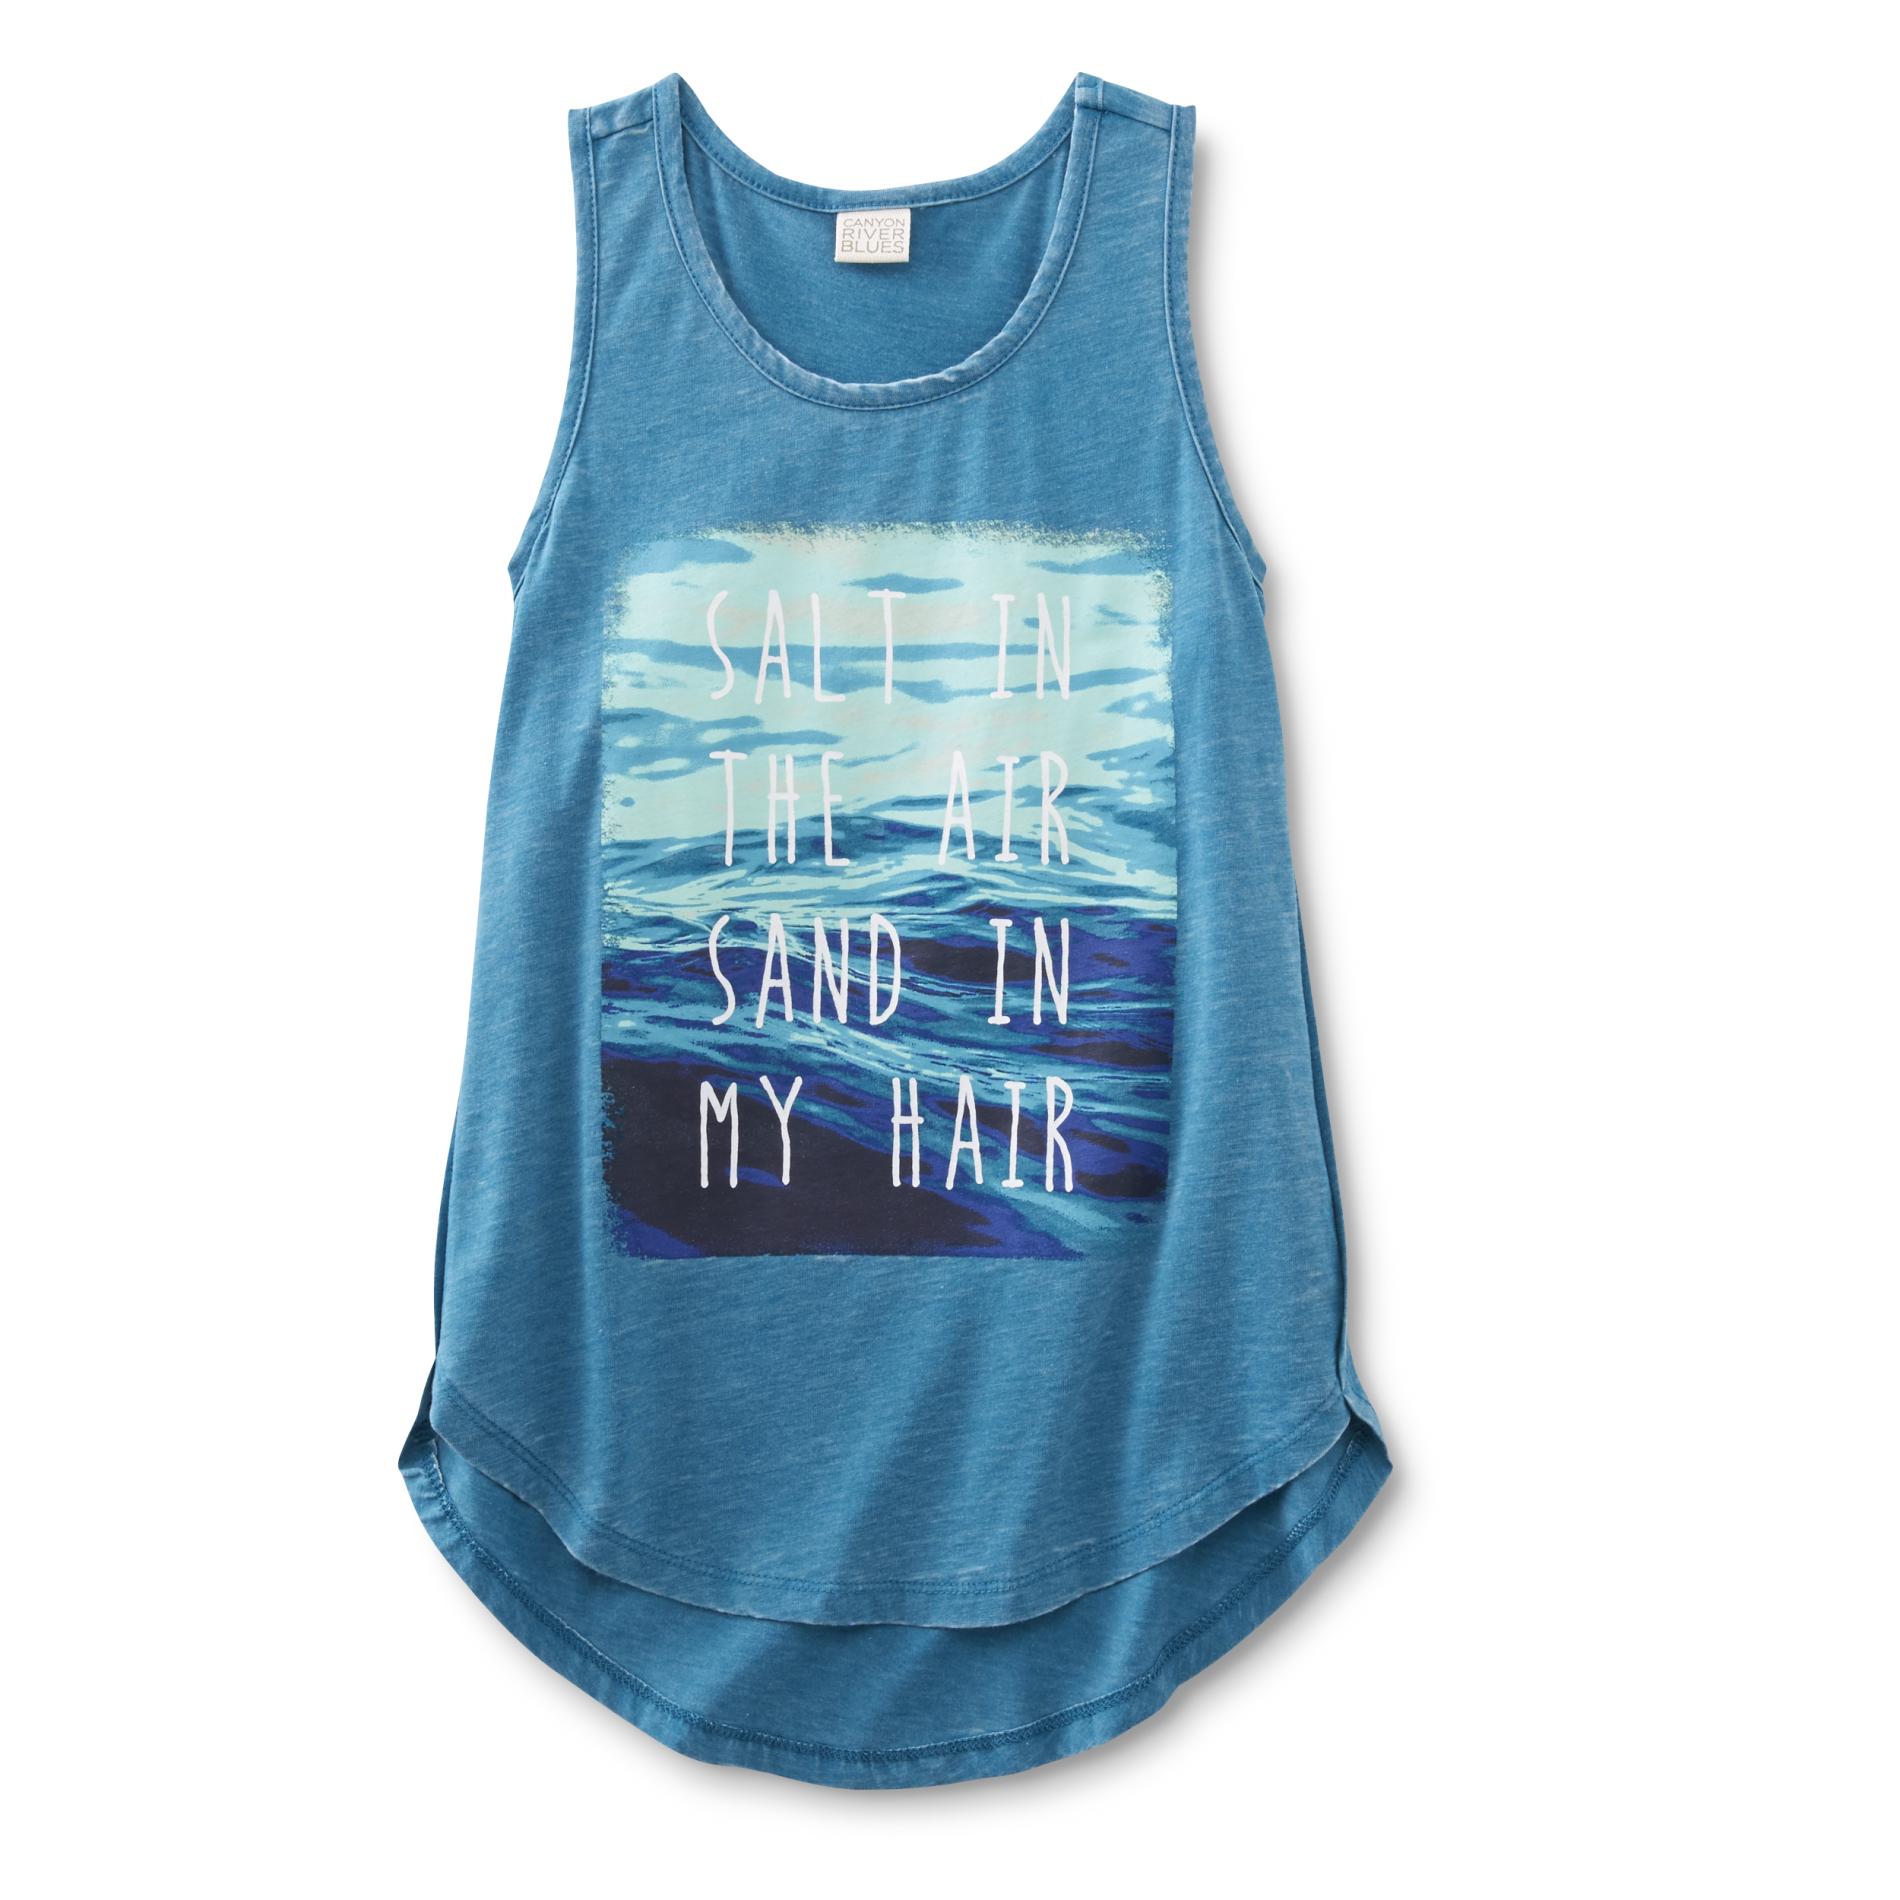 Girl's Graphic Tank Top - Salt in the Air